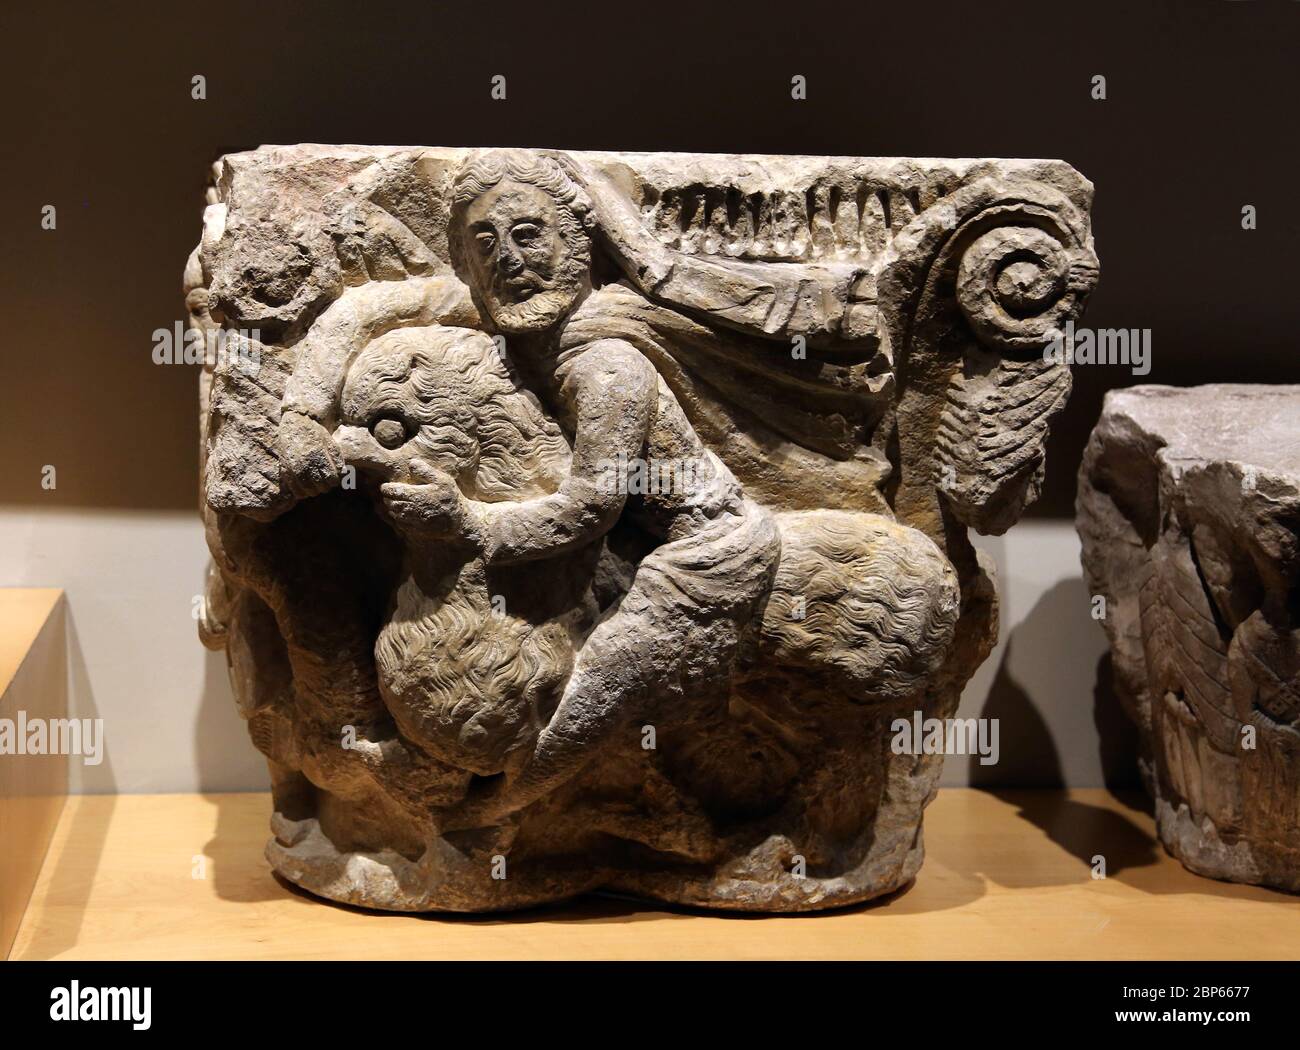 Romanesque capital with Samson. End of 12th century. Carved stone.  Villaherreros, Palencia.  Frederic Mares Museum, Barcelona, Spain. Stock Photo